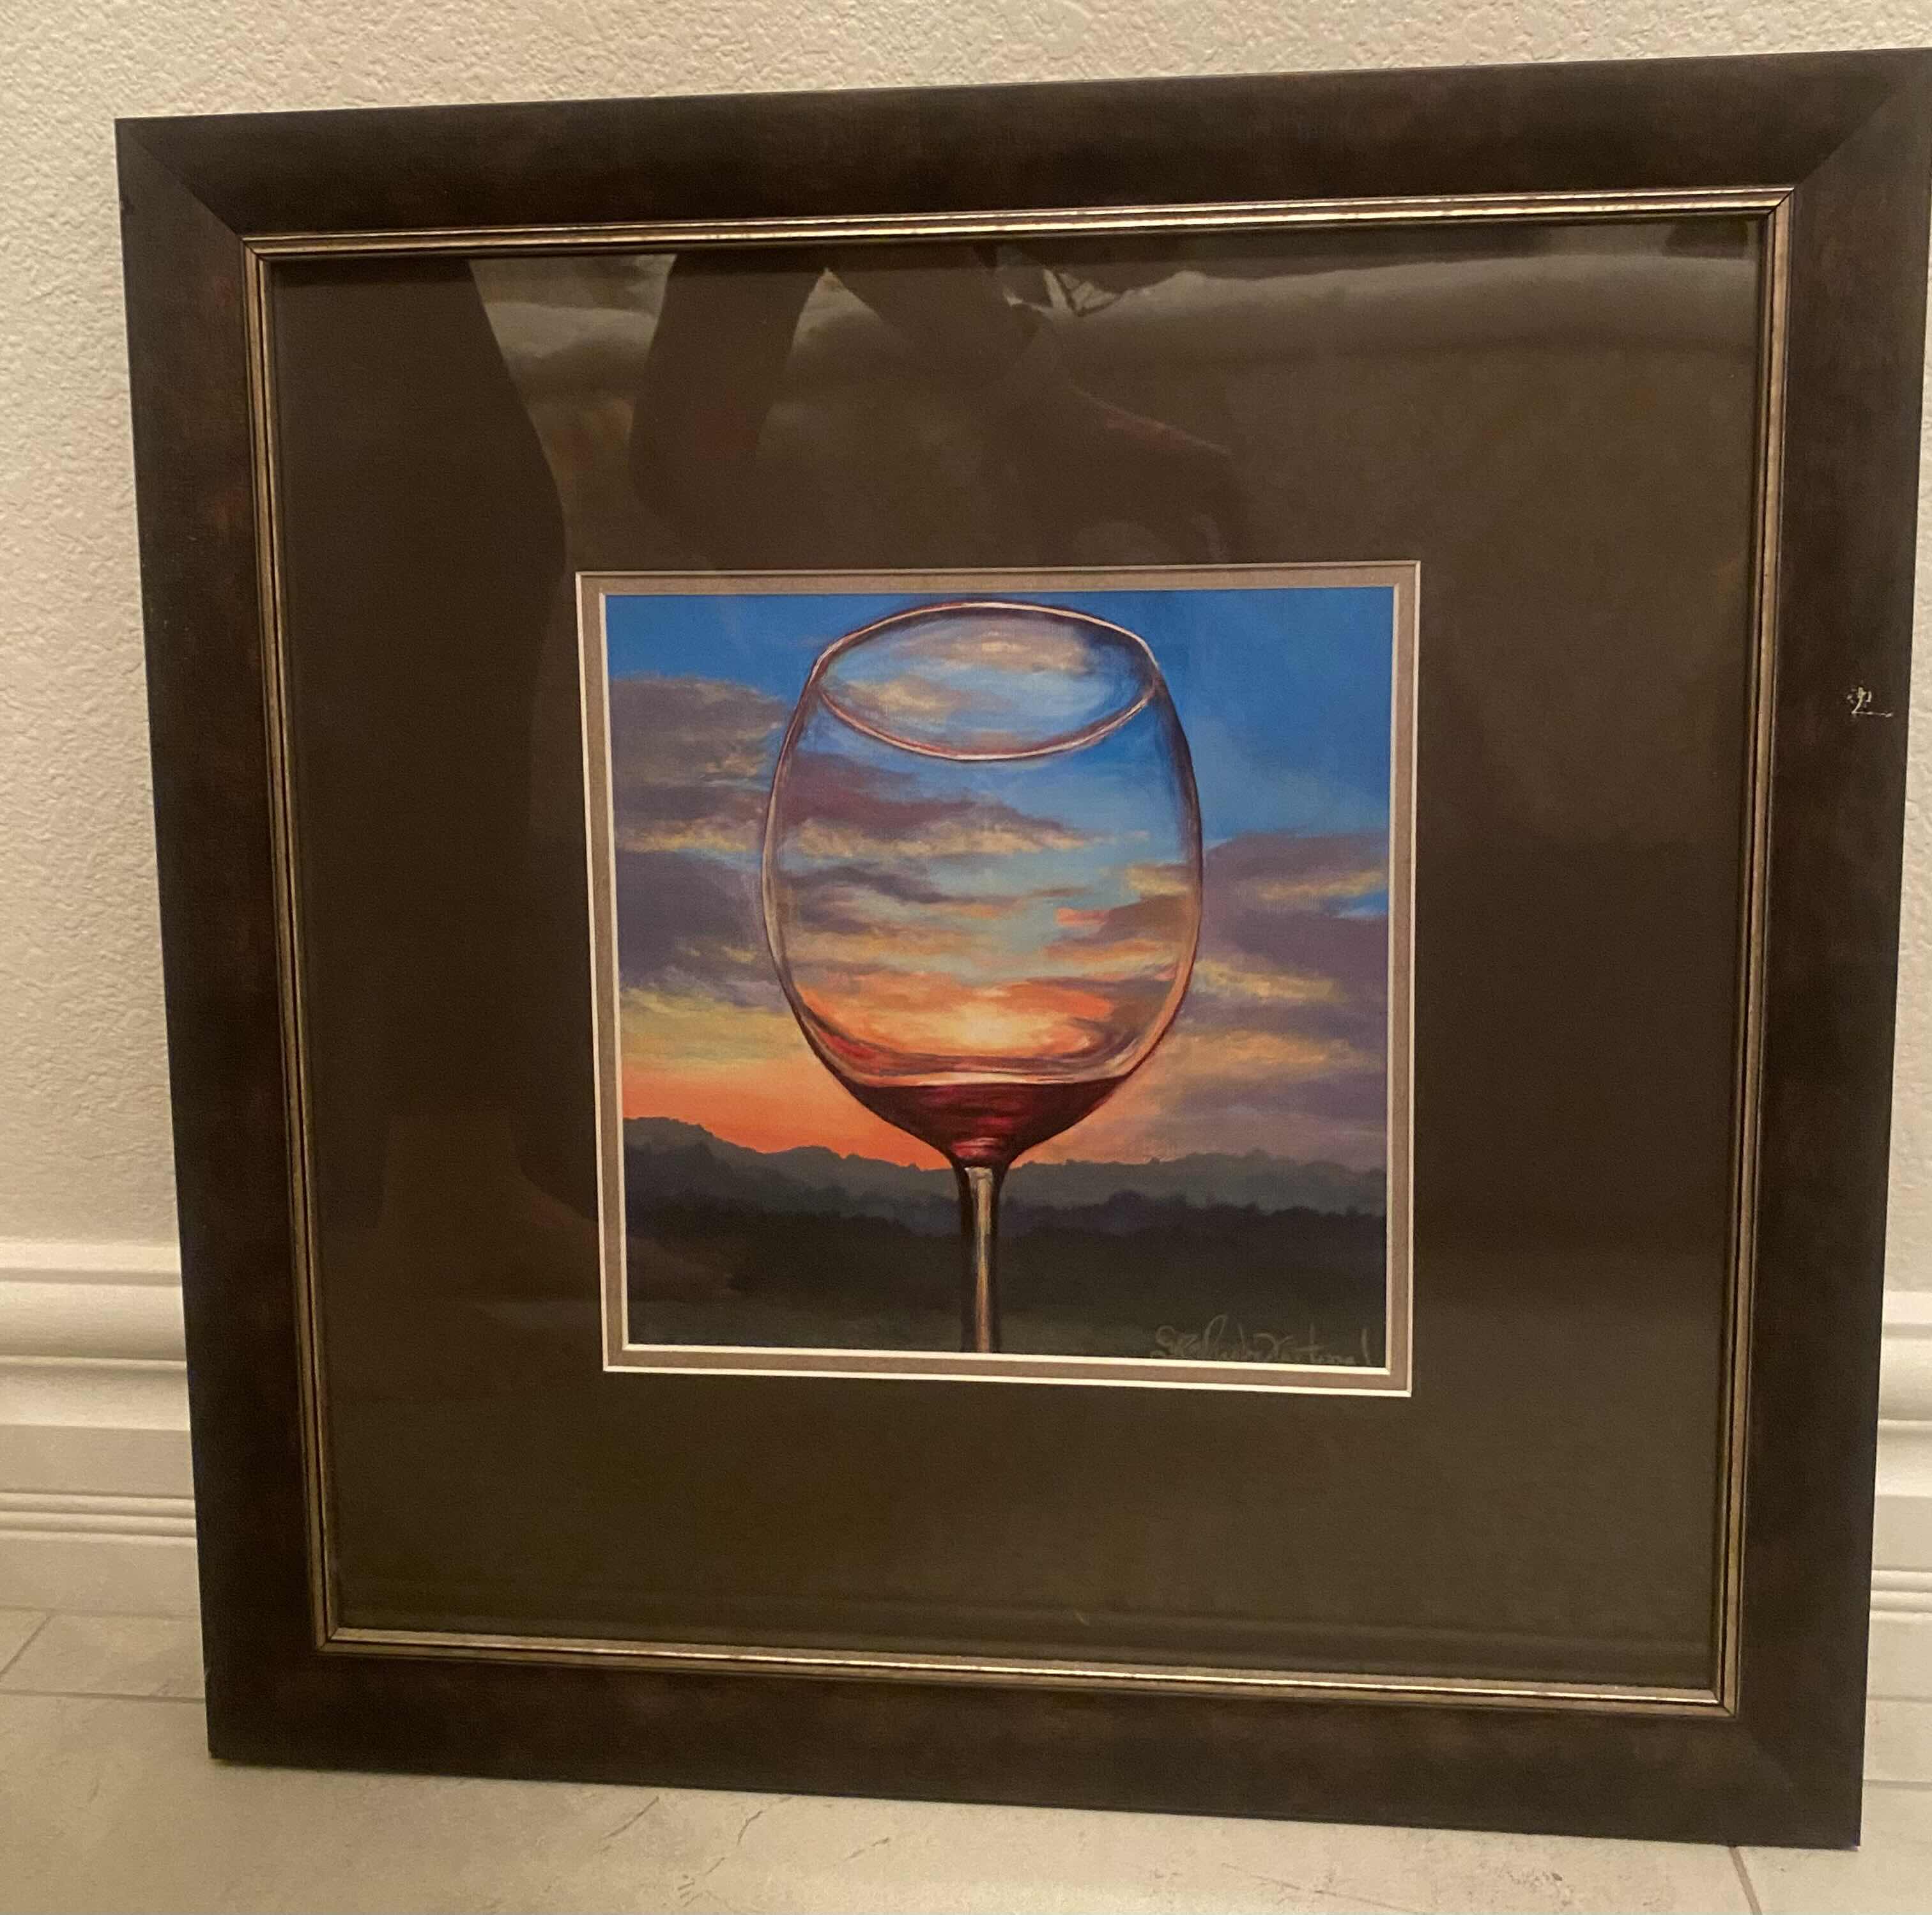 Photo 1 of CUSTOM WOOD FRAMED & MATTED IDAHO WATERCOLOR LANDSCAPE WITH WINE SIGNED BY ARTIST ARTWORK 21 1/2” x 21 1/2”